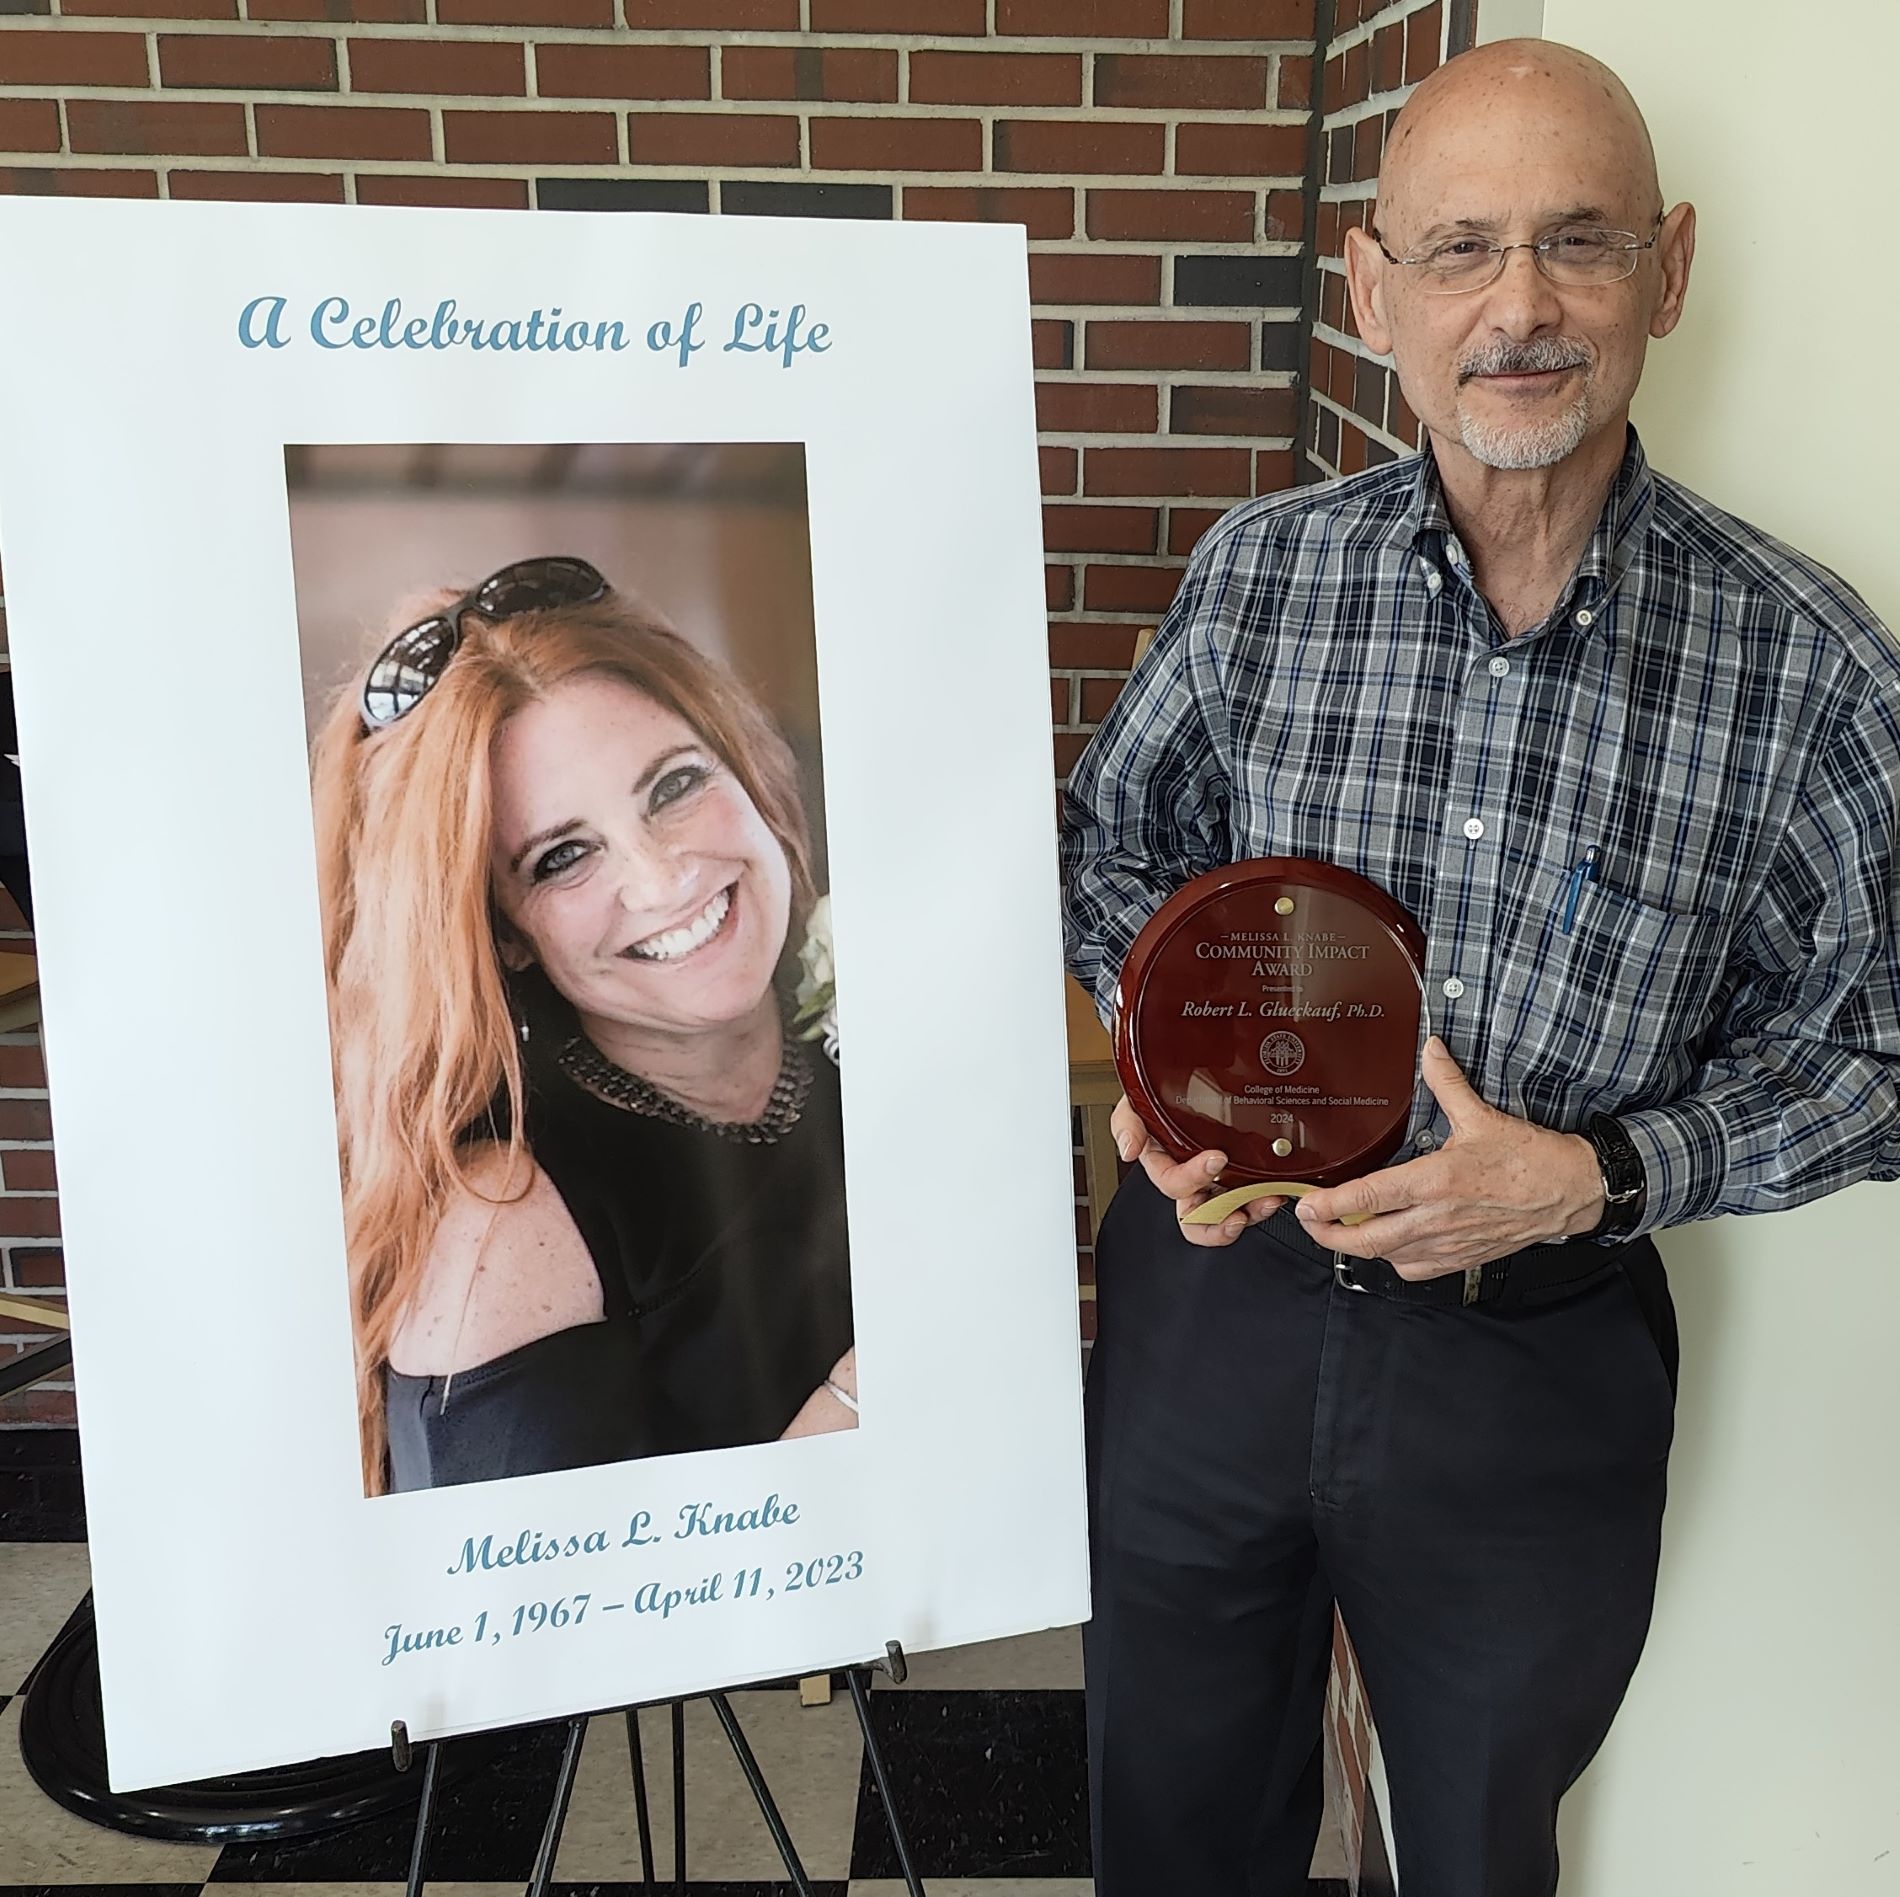 Robert Glueckauf, Ph.D. poses with his award next to a photo of the late Melissa L. Knabe.